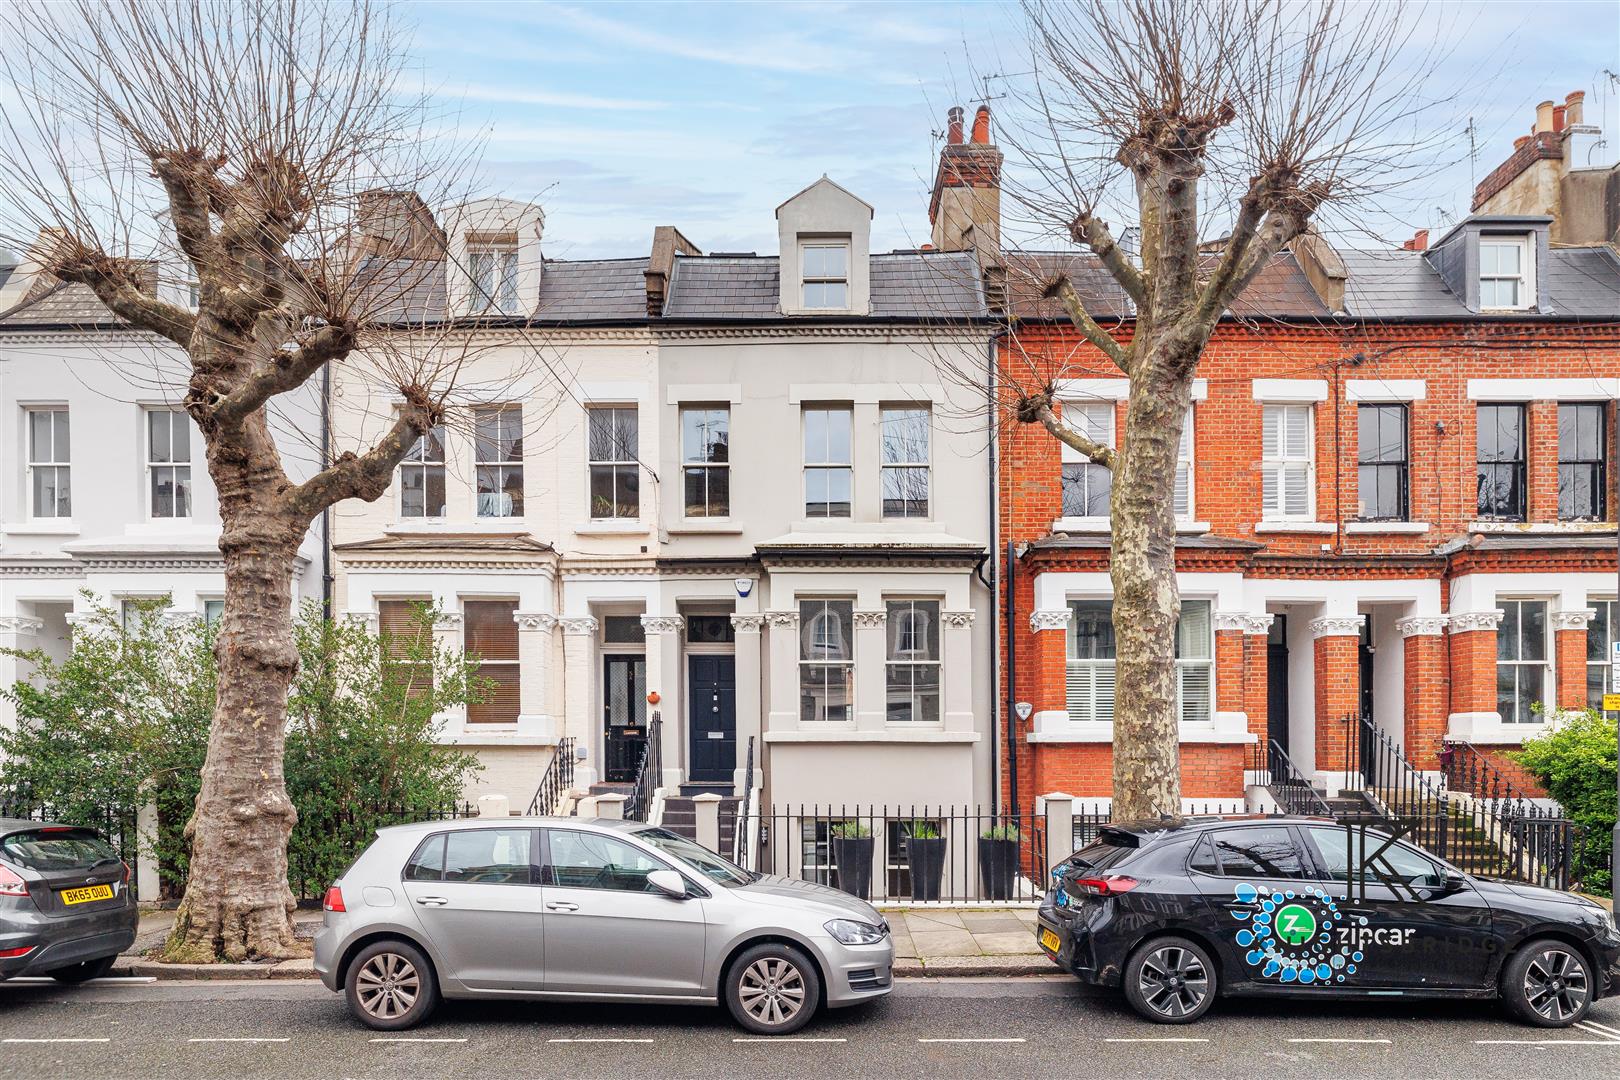 A photo of a row of houses in London